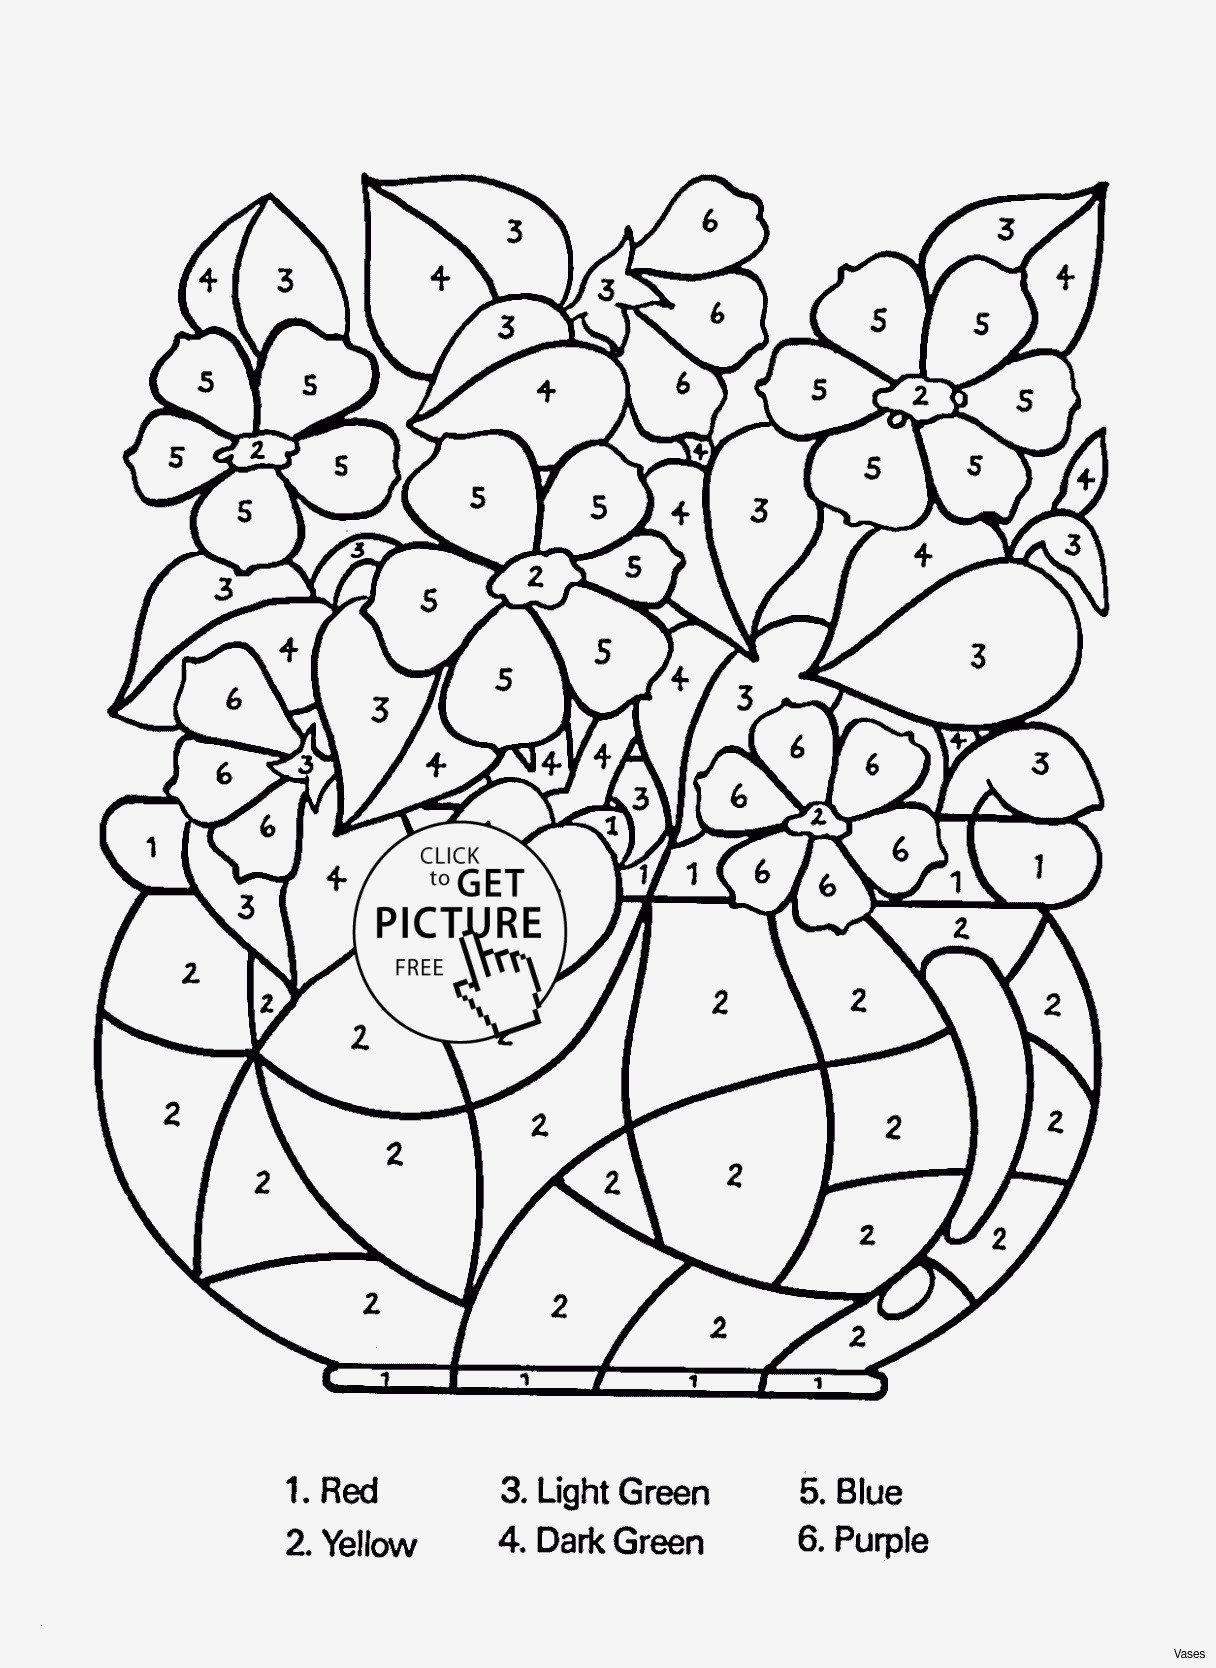 flowers with vase free delivery of free flower coloring pages best ever free flower coloring pages pertaining to free flower coloring pages best ever free flower coloring pages awesome vases flower vase coloring page